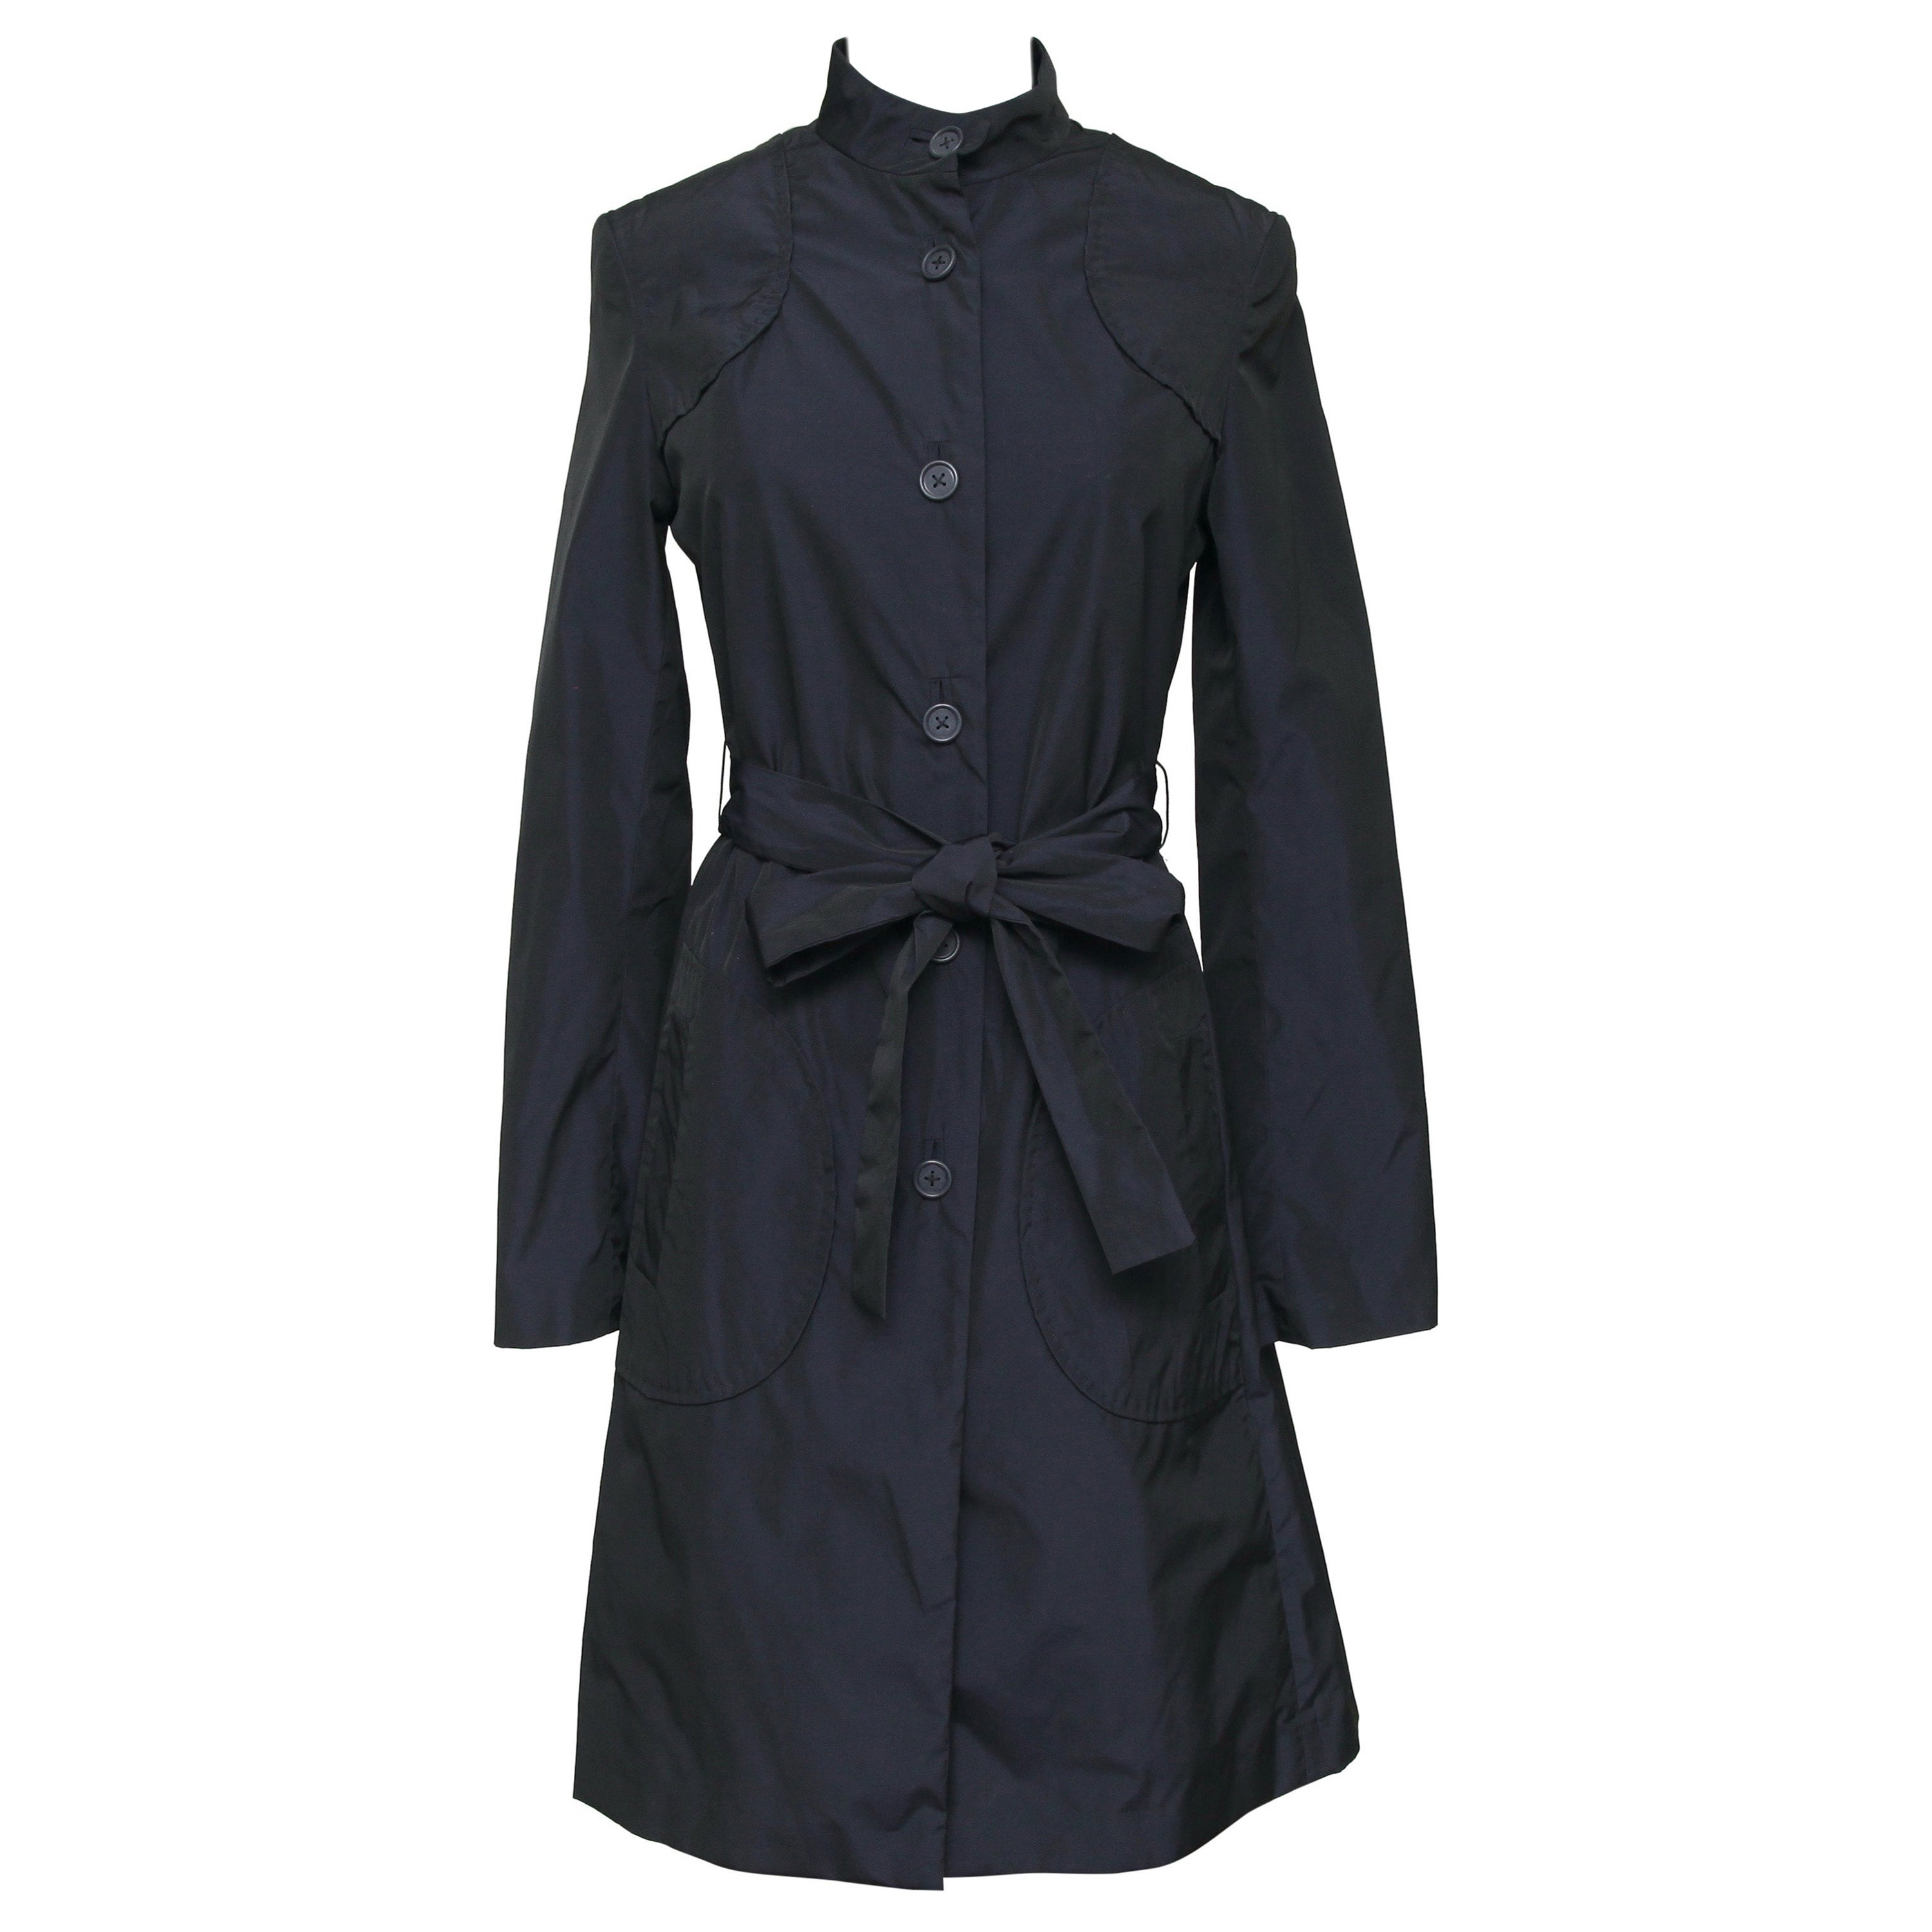 STELLA MCCARTNEY Trench Coat Navy Blue Buttons Mid-Length Belt Clothing Sz 38 For Sale